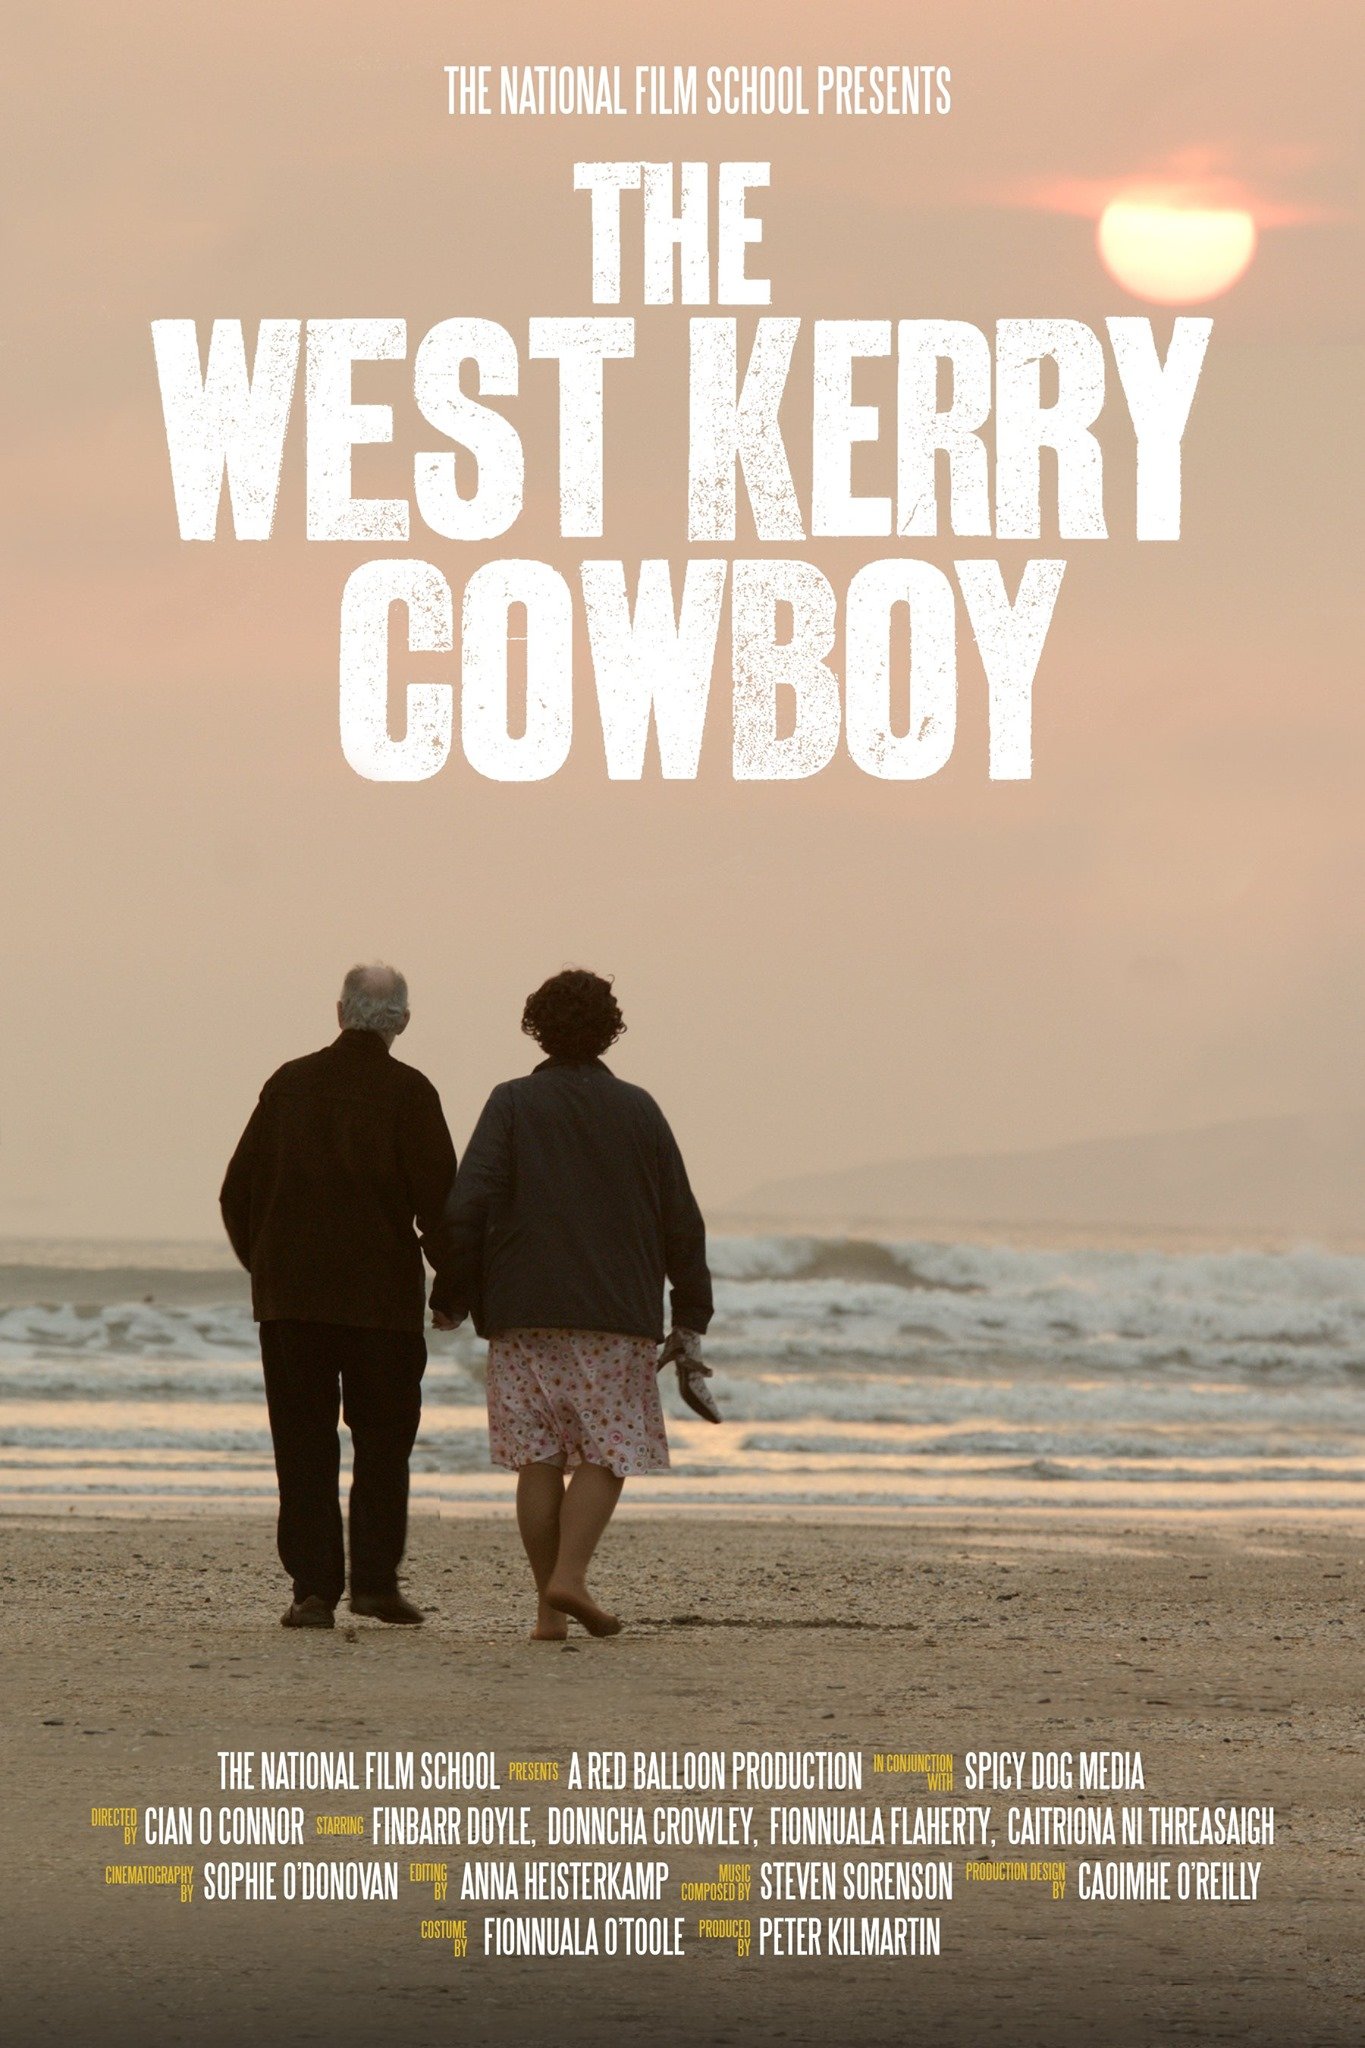 Cian O'Connor’s THE WEST KERRY COWBOY